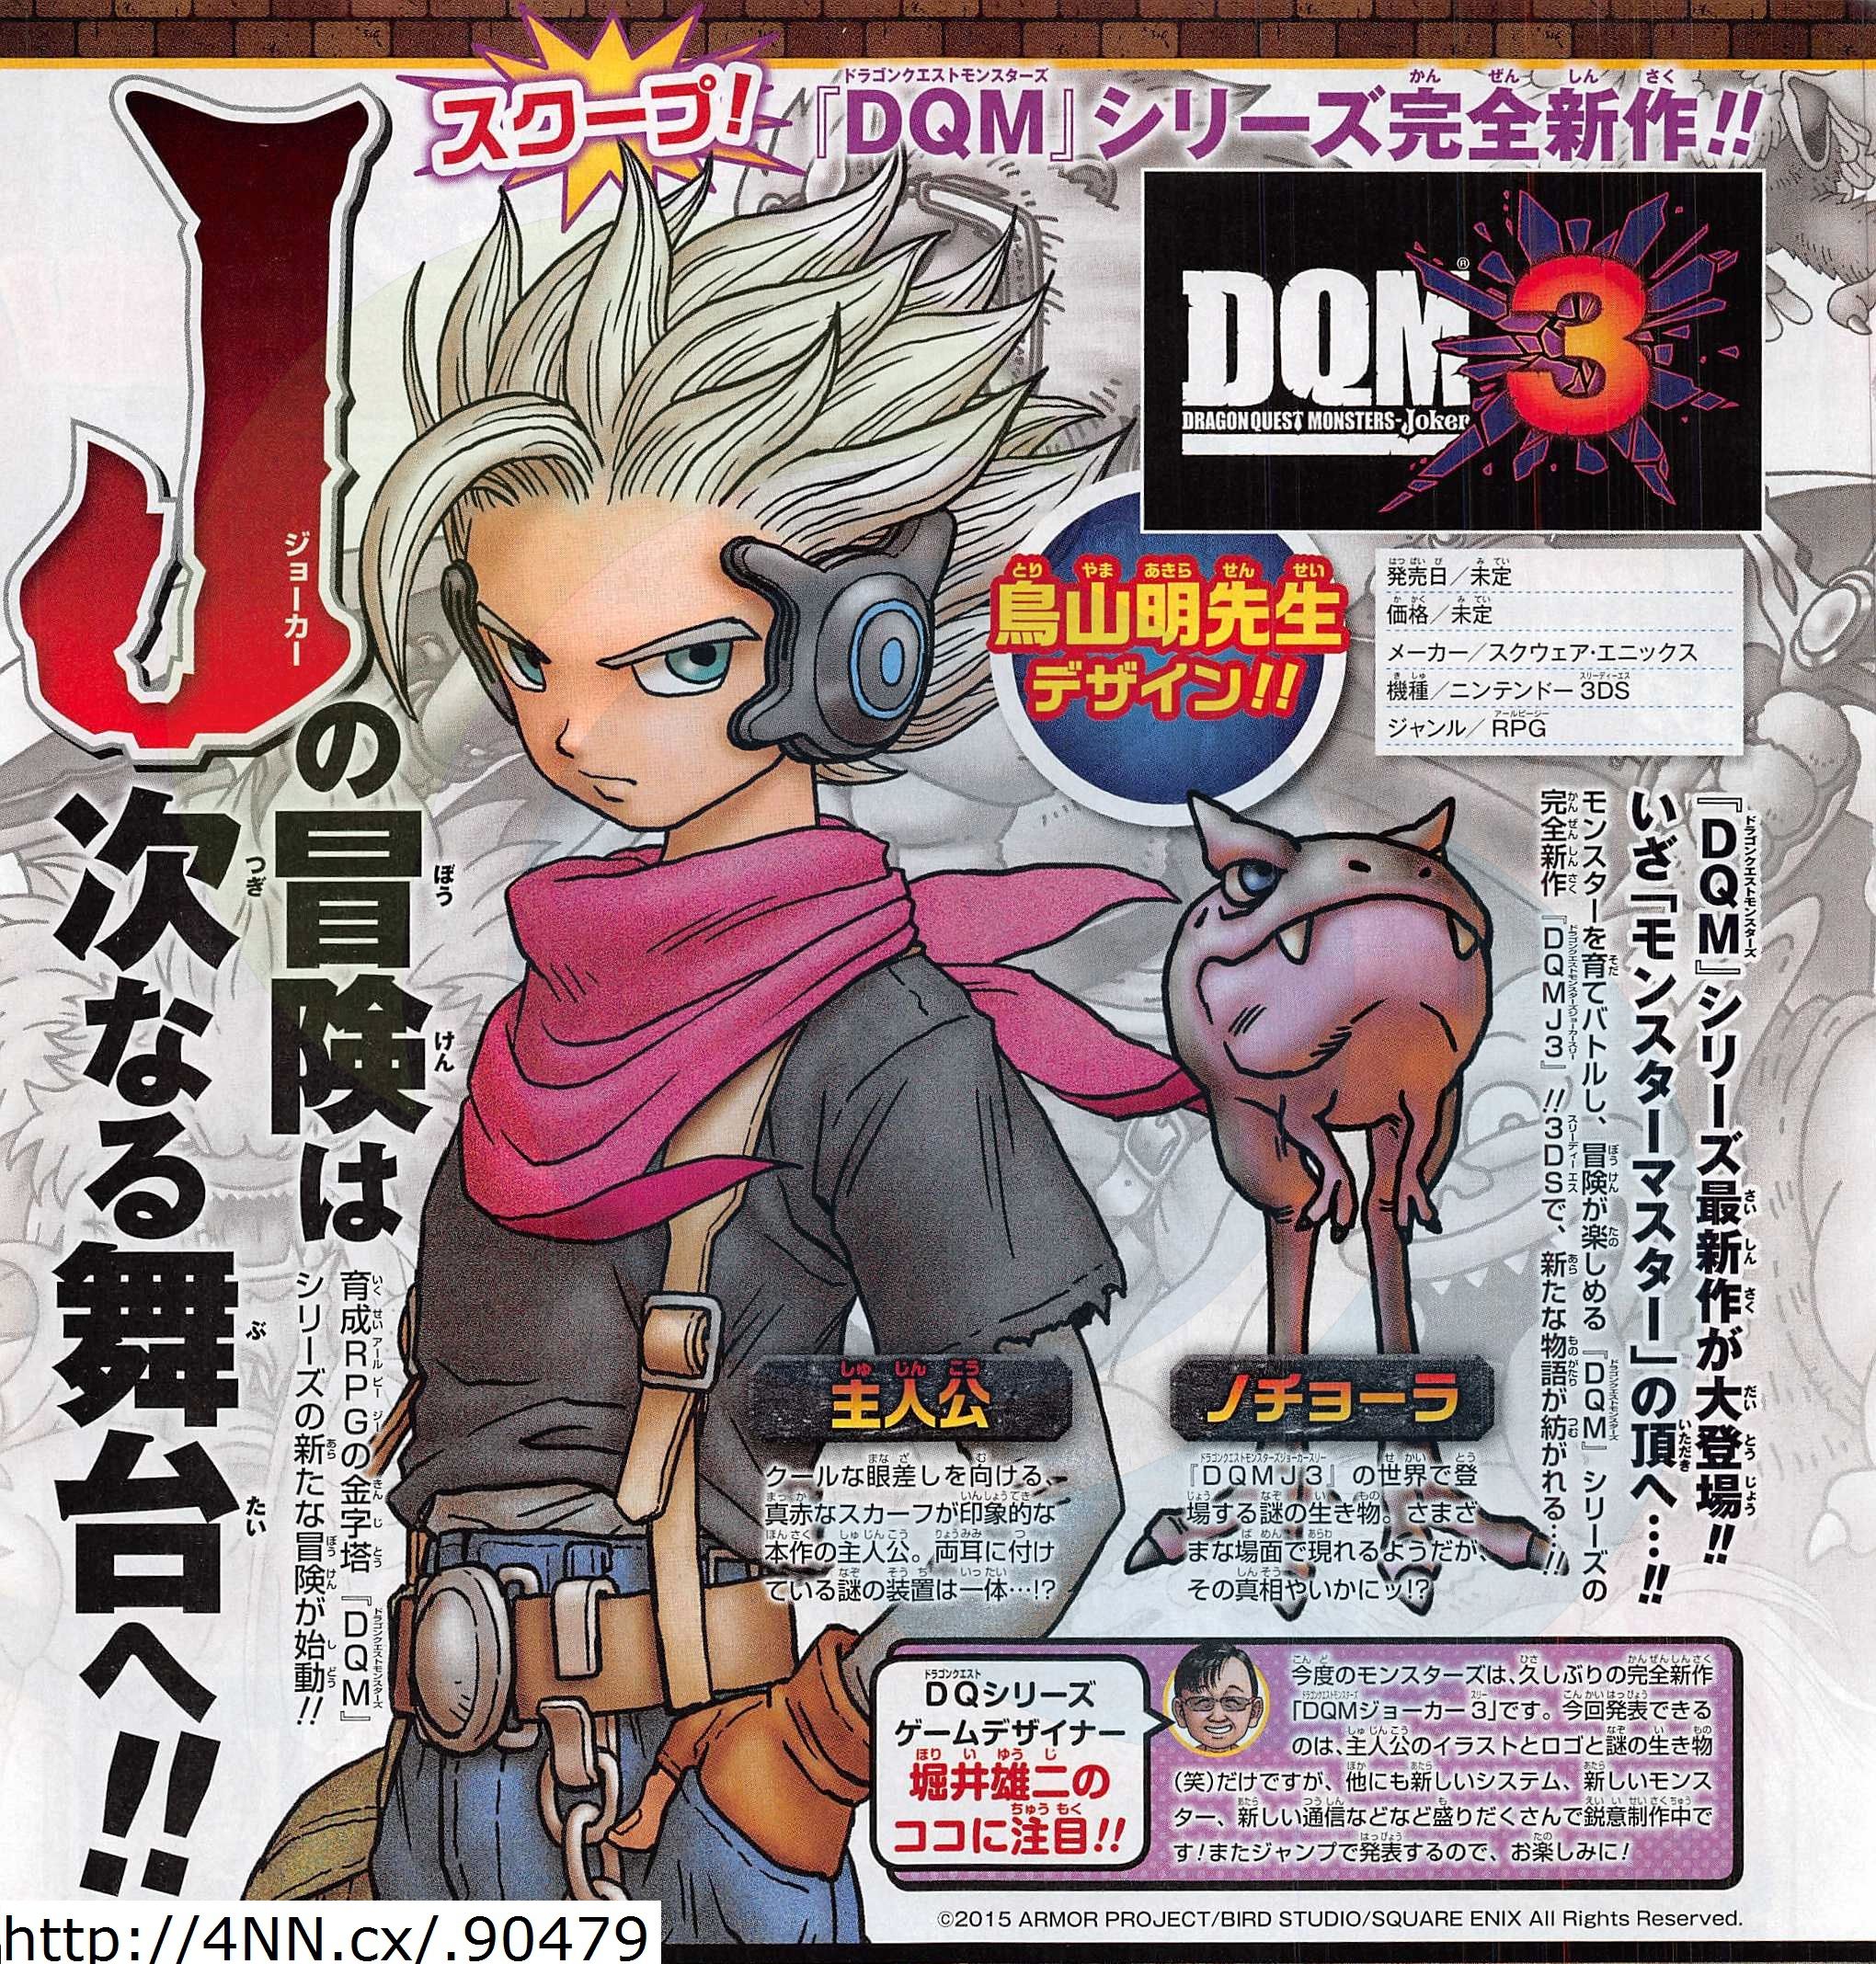 Dragon Quest Monsters: Joker 3 - higher-quality scan, comment from